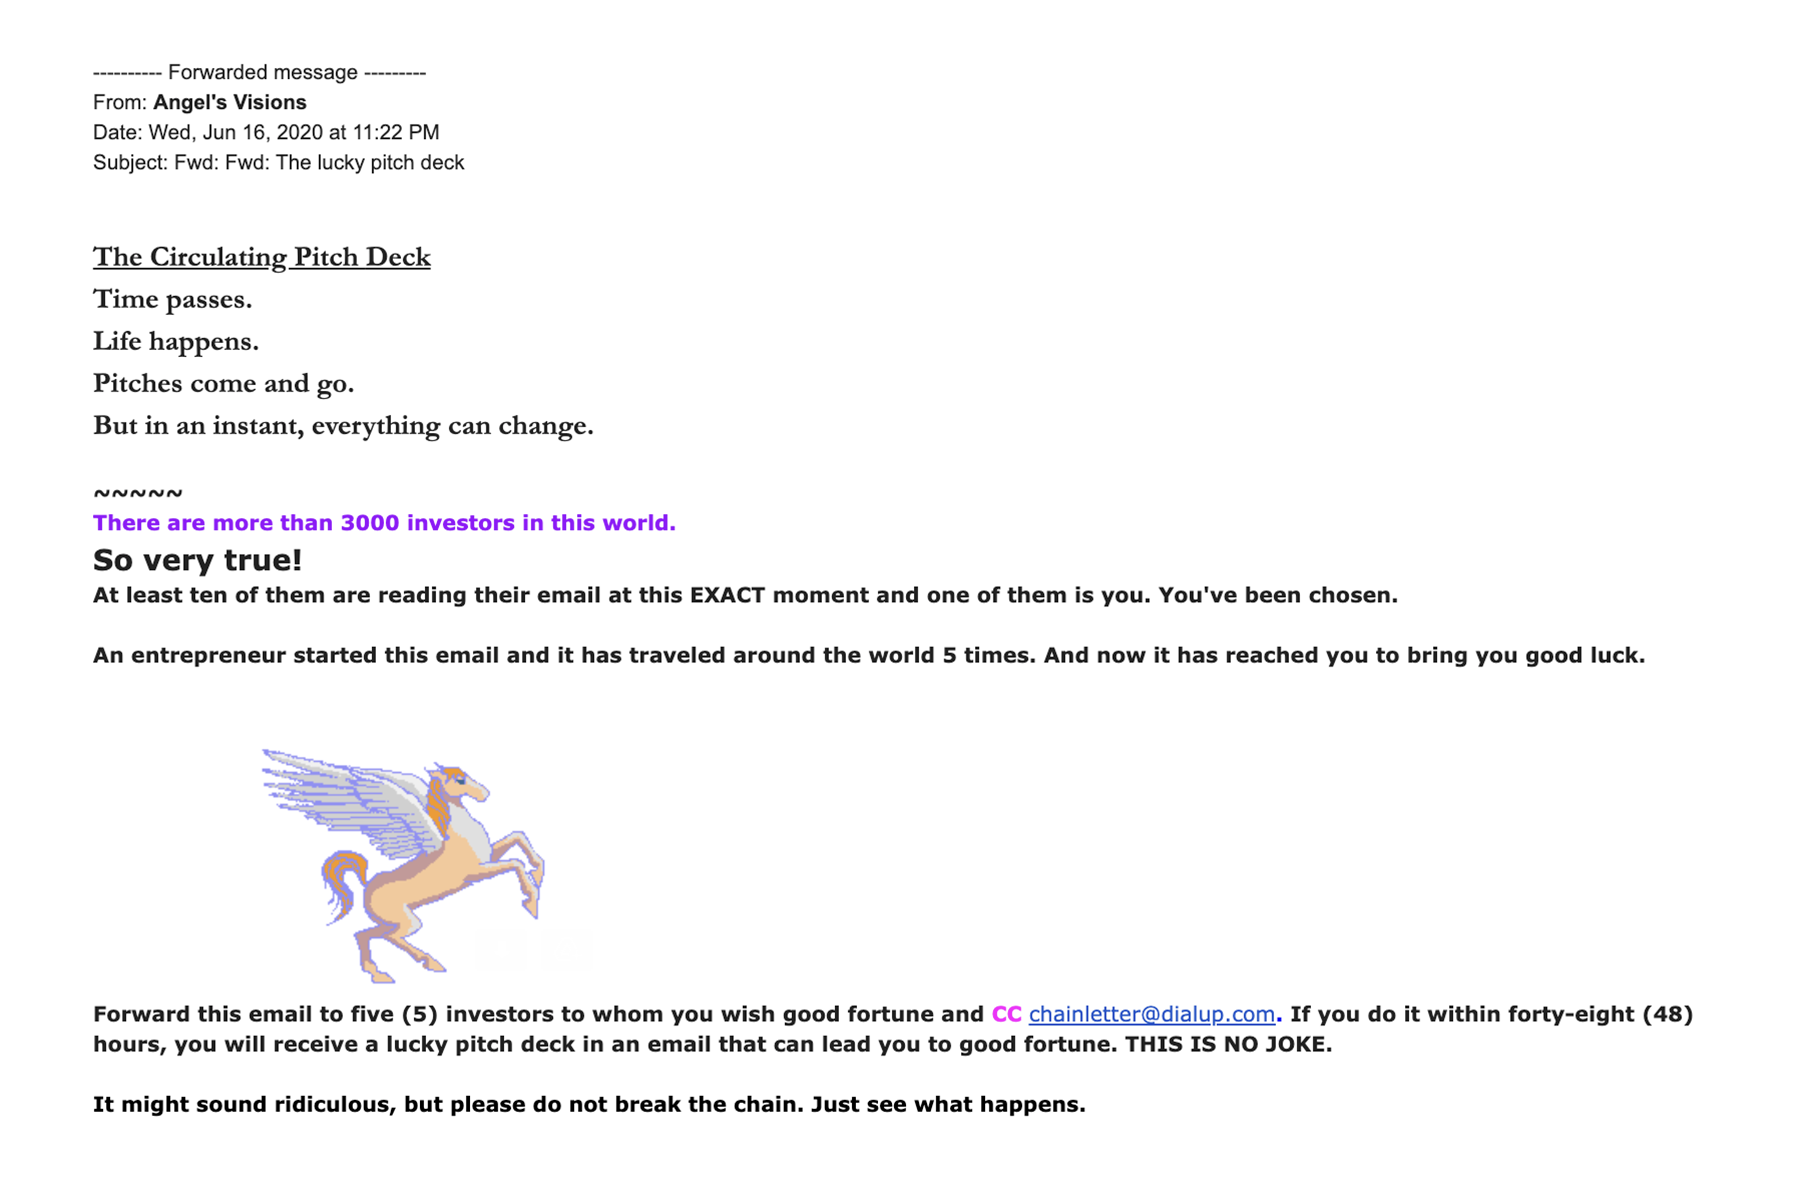 A screenshot of Baskin&#x27;s lucky pitch deck email, a unicorn-gif-laden throwback to an earlier era of email spam